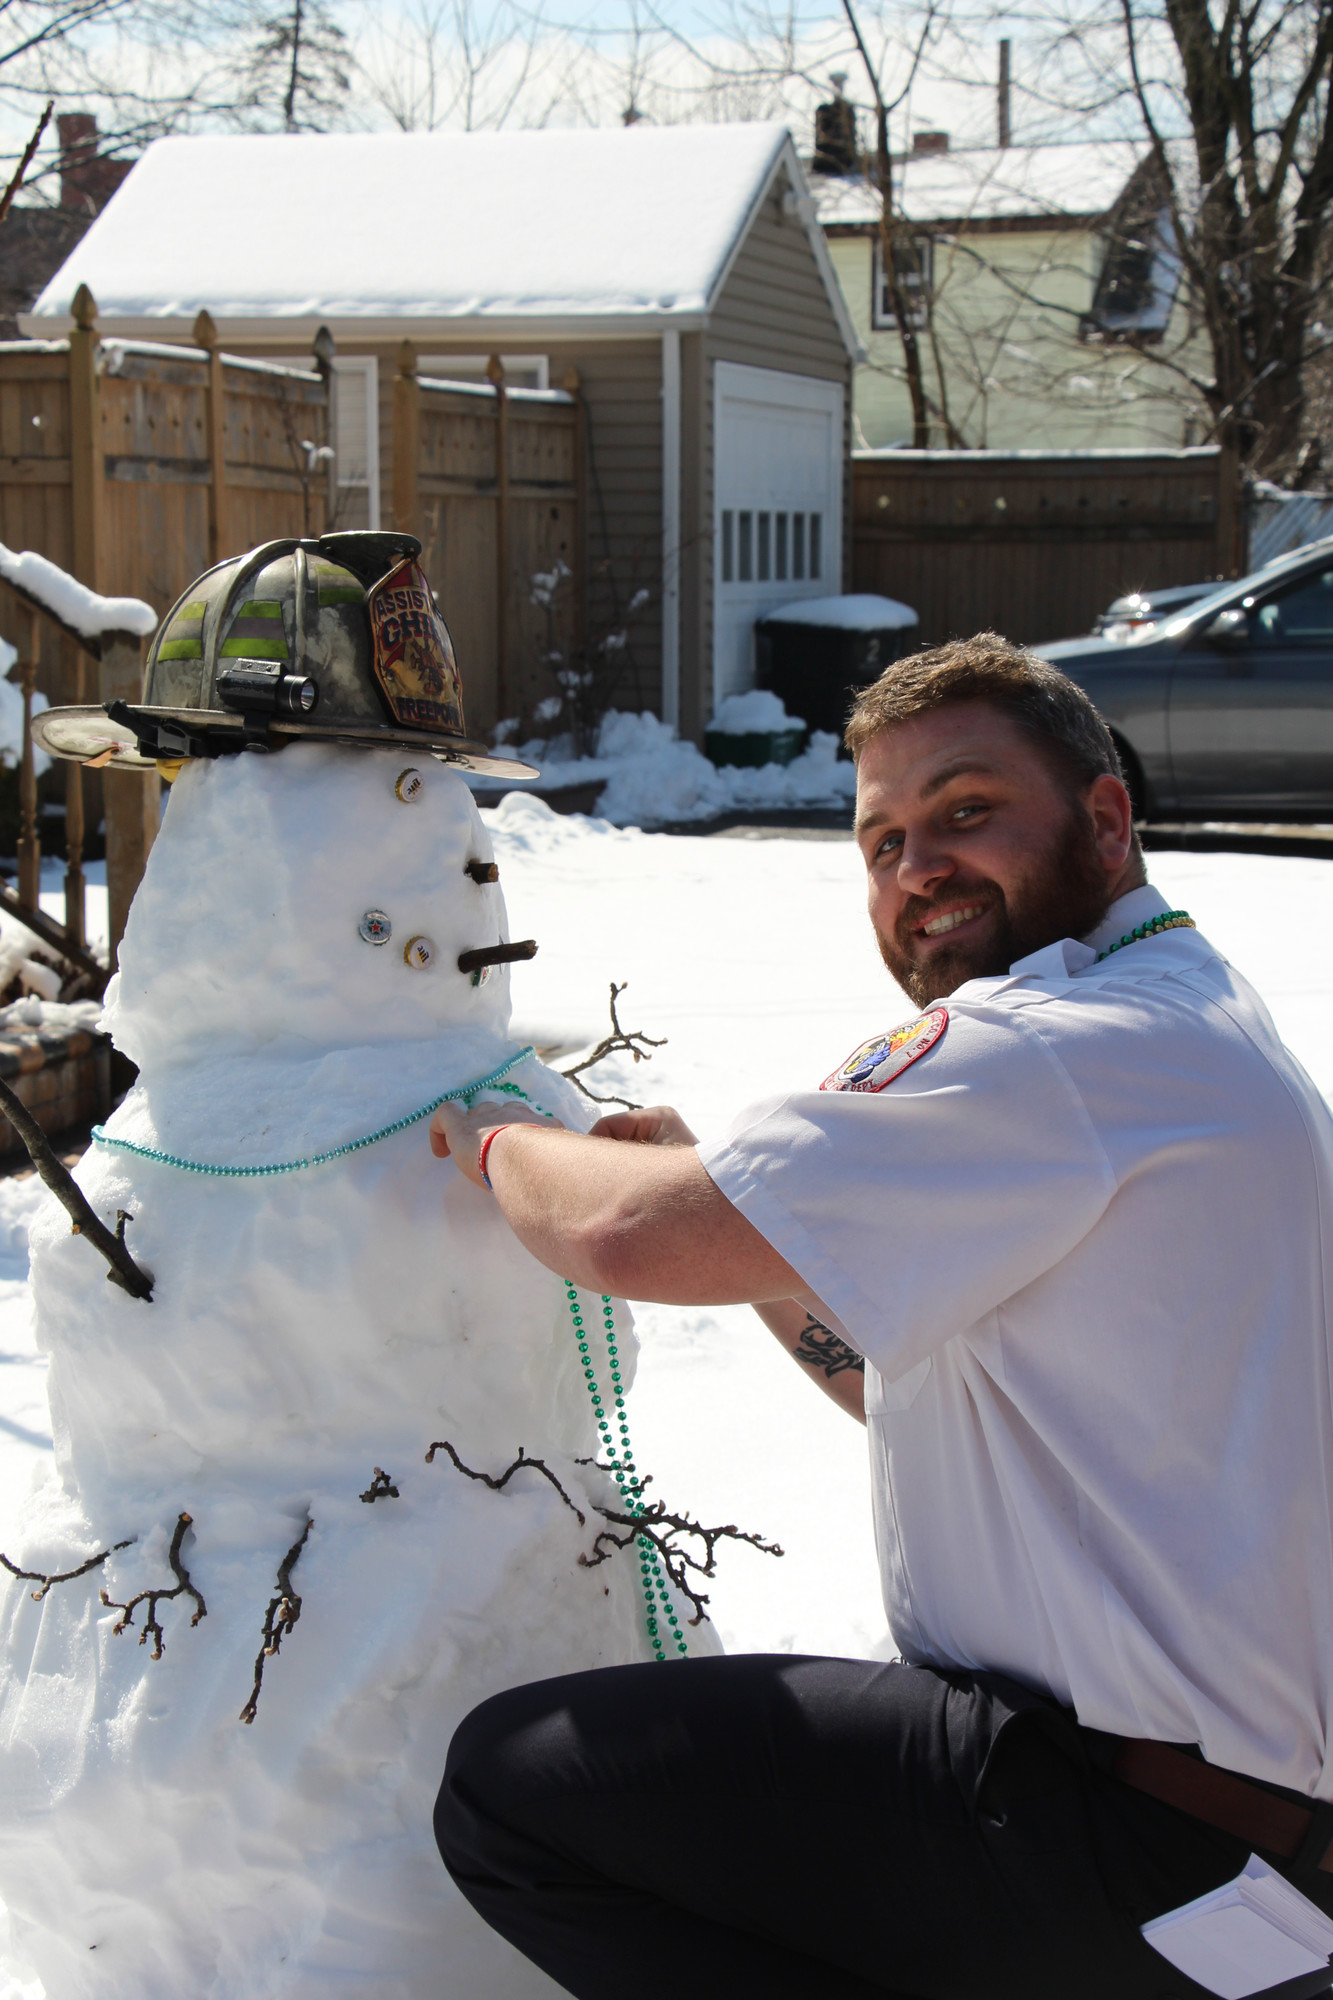 Freeport Firefighter Eddie Tyler made the best of the cold weather and gave a snowman a St. Patrick’s Parade makeover.